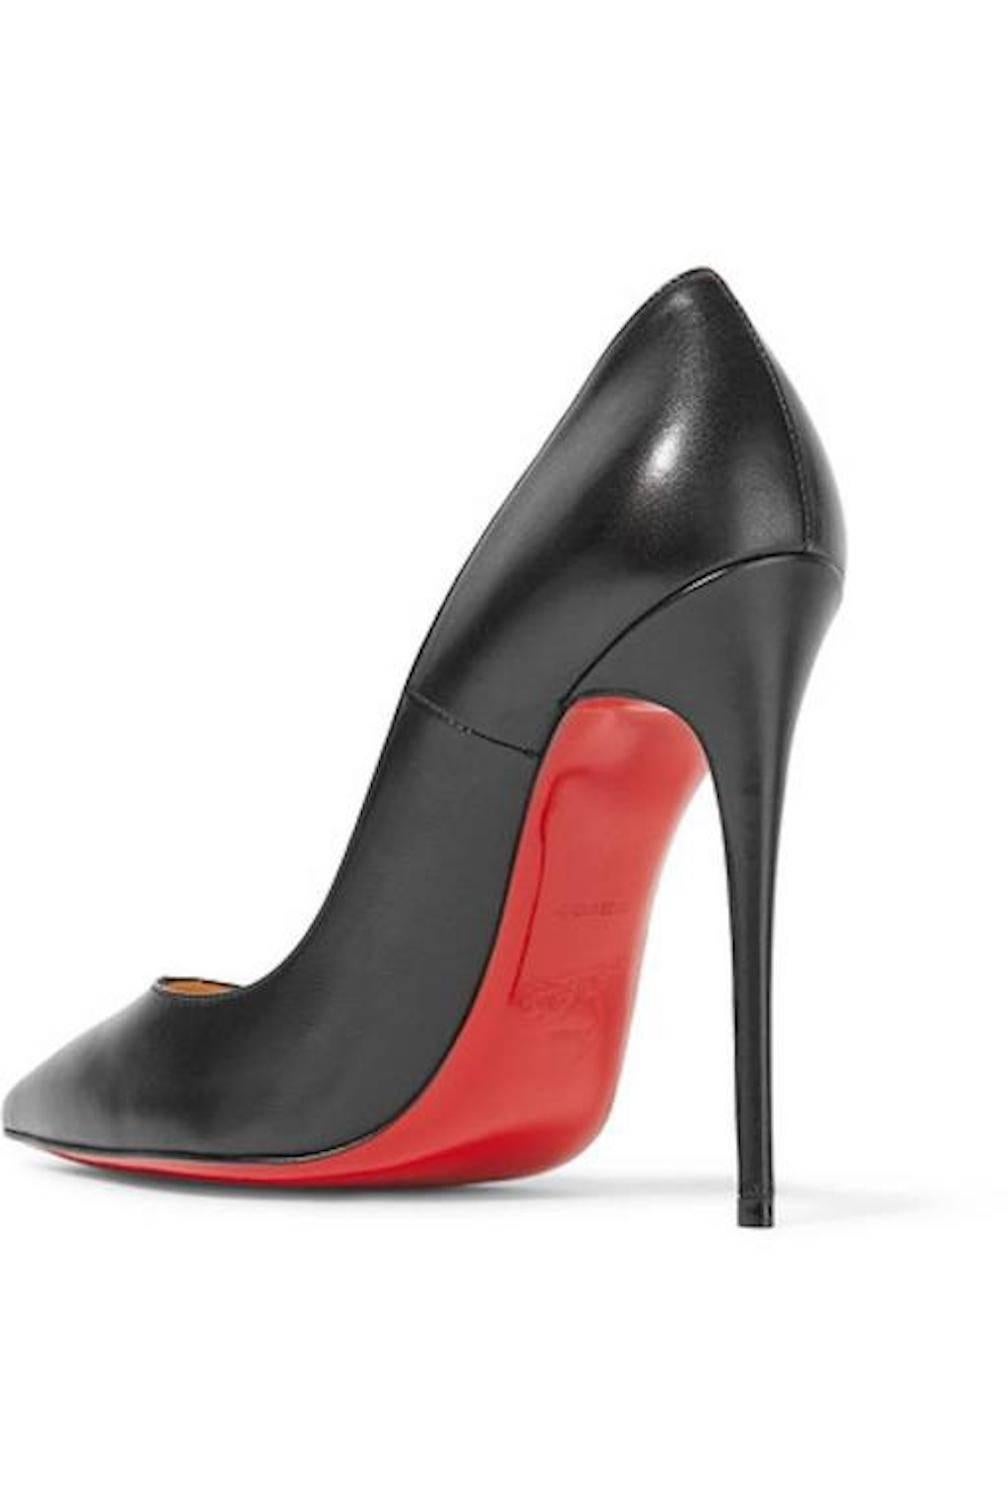 Women's Christian Louboutin New Black Leather SO Kate High Heels Pumps in Box 